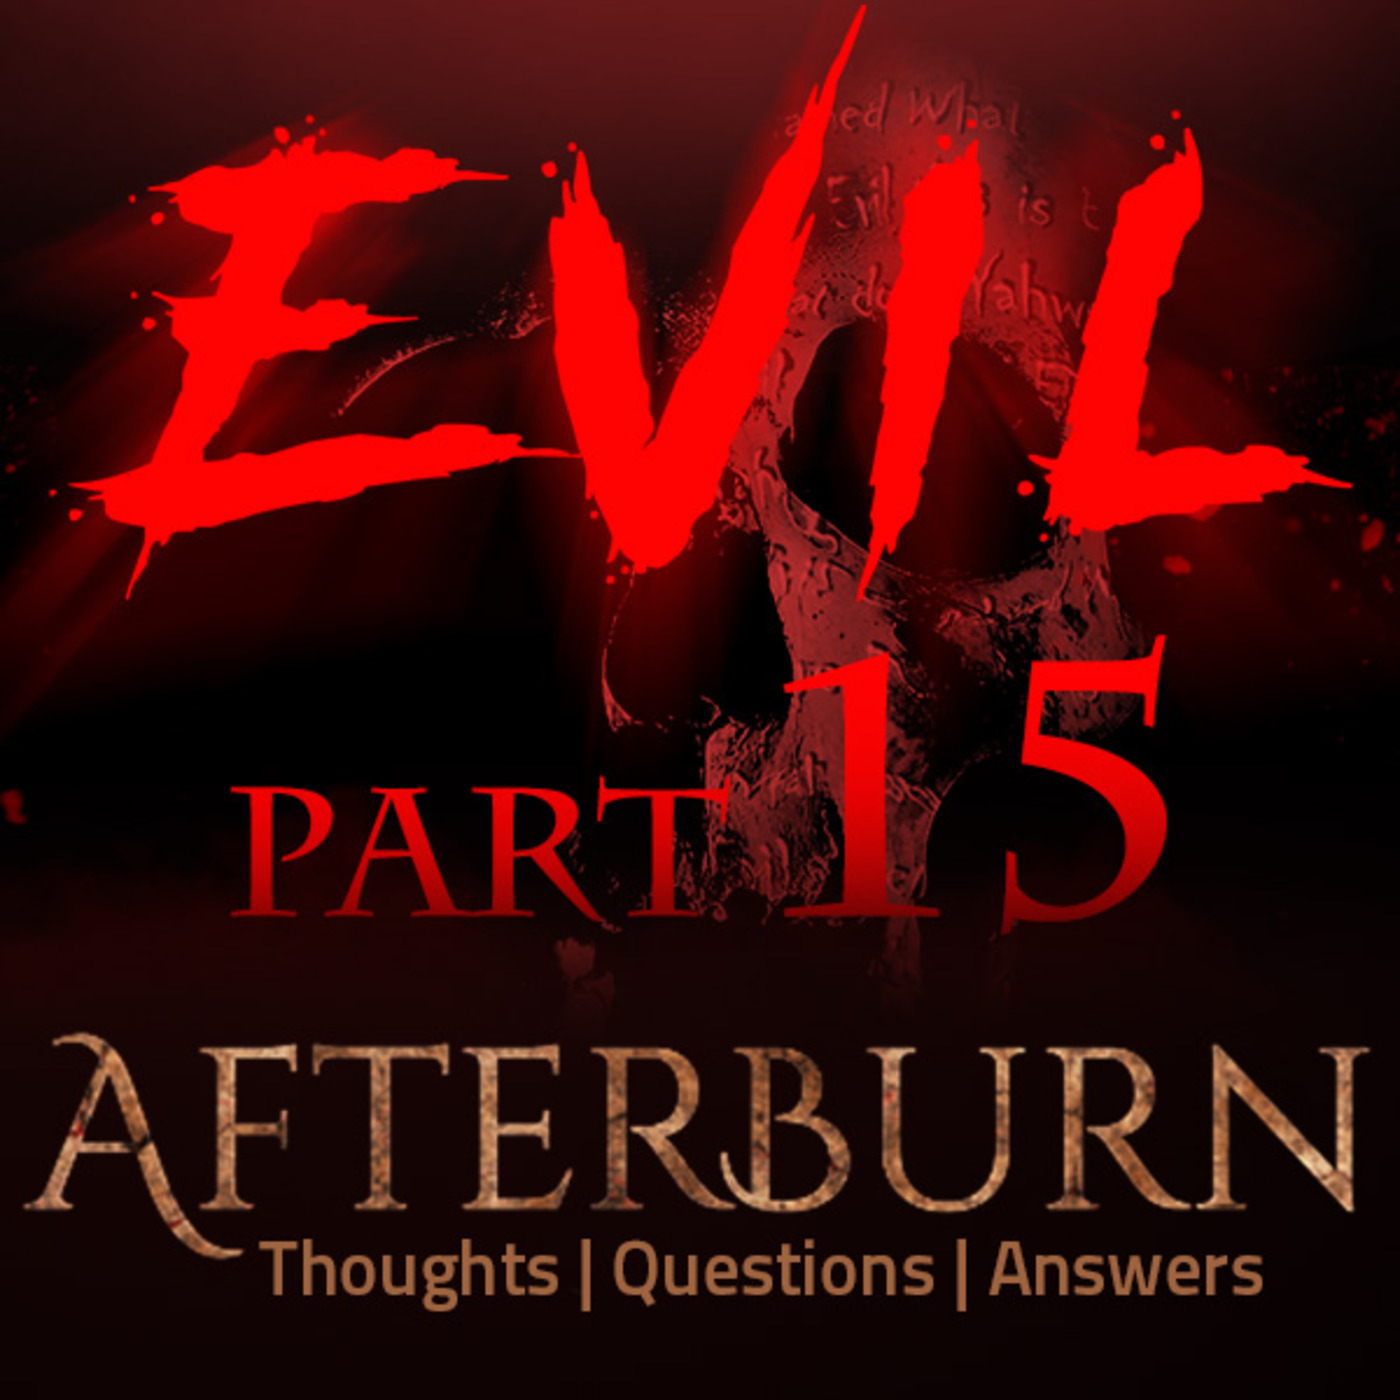 Episode 742: Afterburn | Thoughts, Q&A on Evil | Part 15